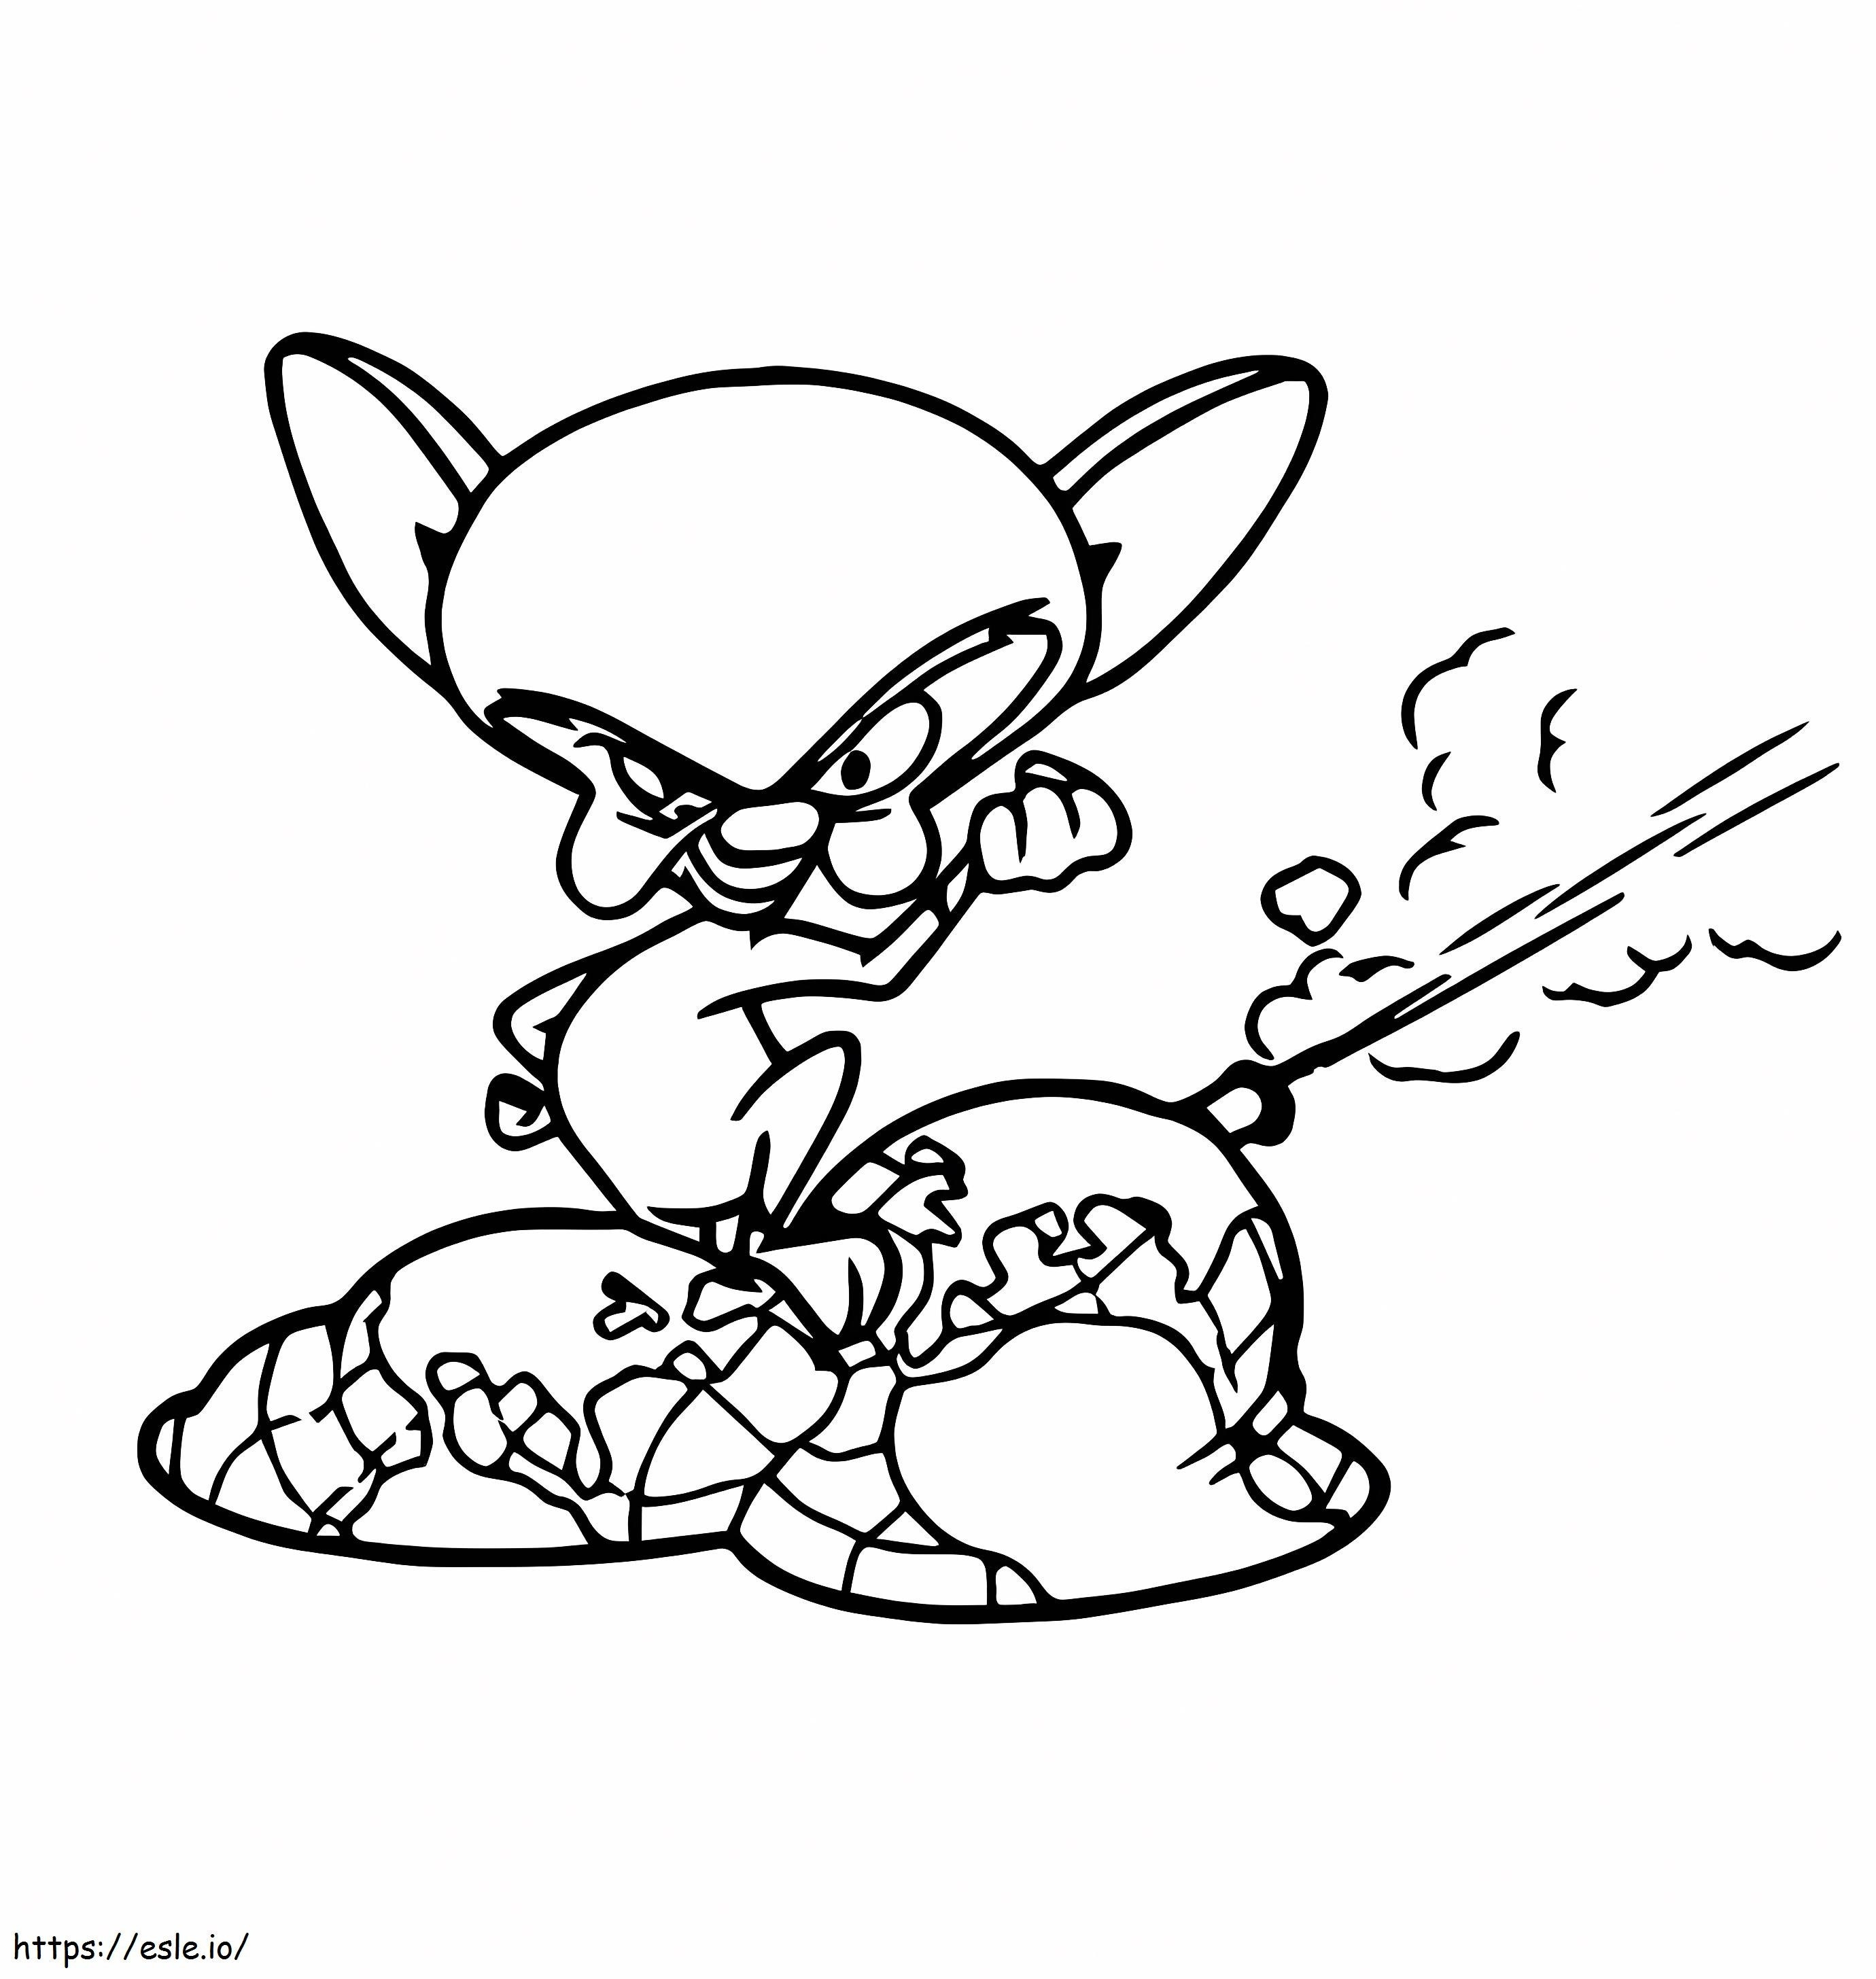 Angry Brain coloring page